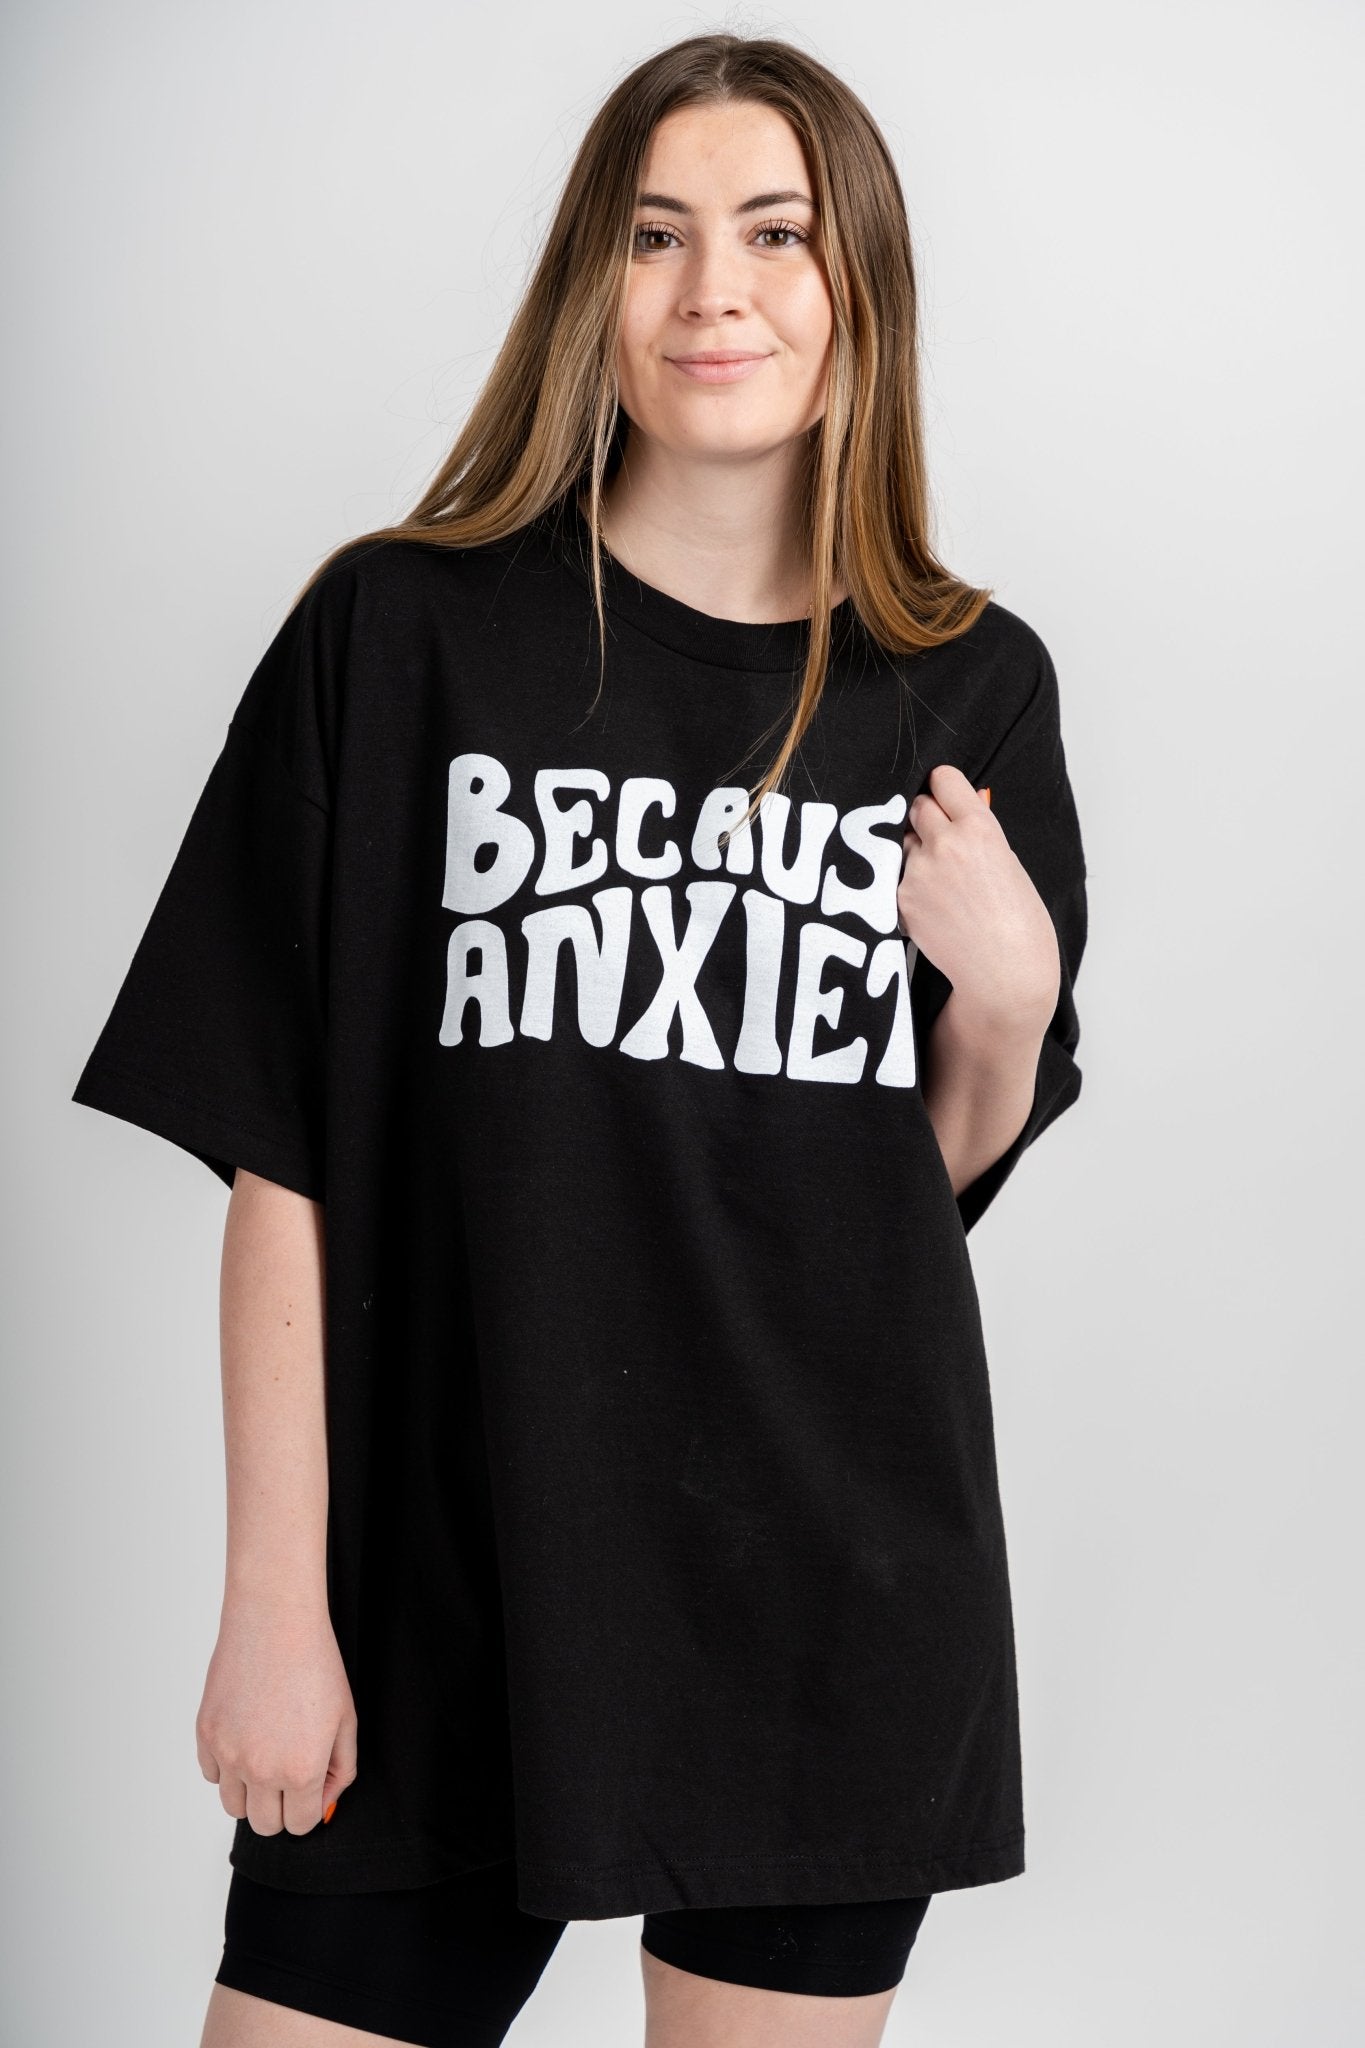 Because anxiety oversized t-shirt black - Cute T-shirts - Funny T-Shirts at Lush Fashion Lounge Boutique in Oklahoma City